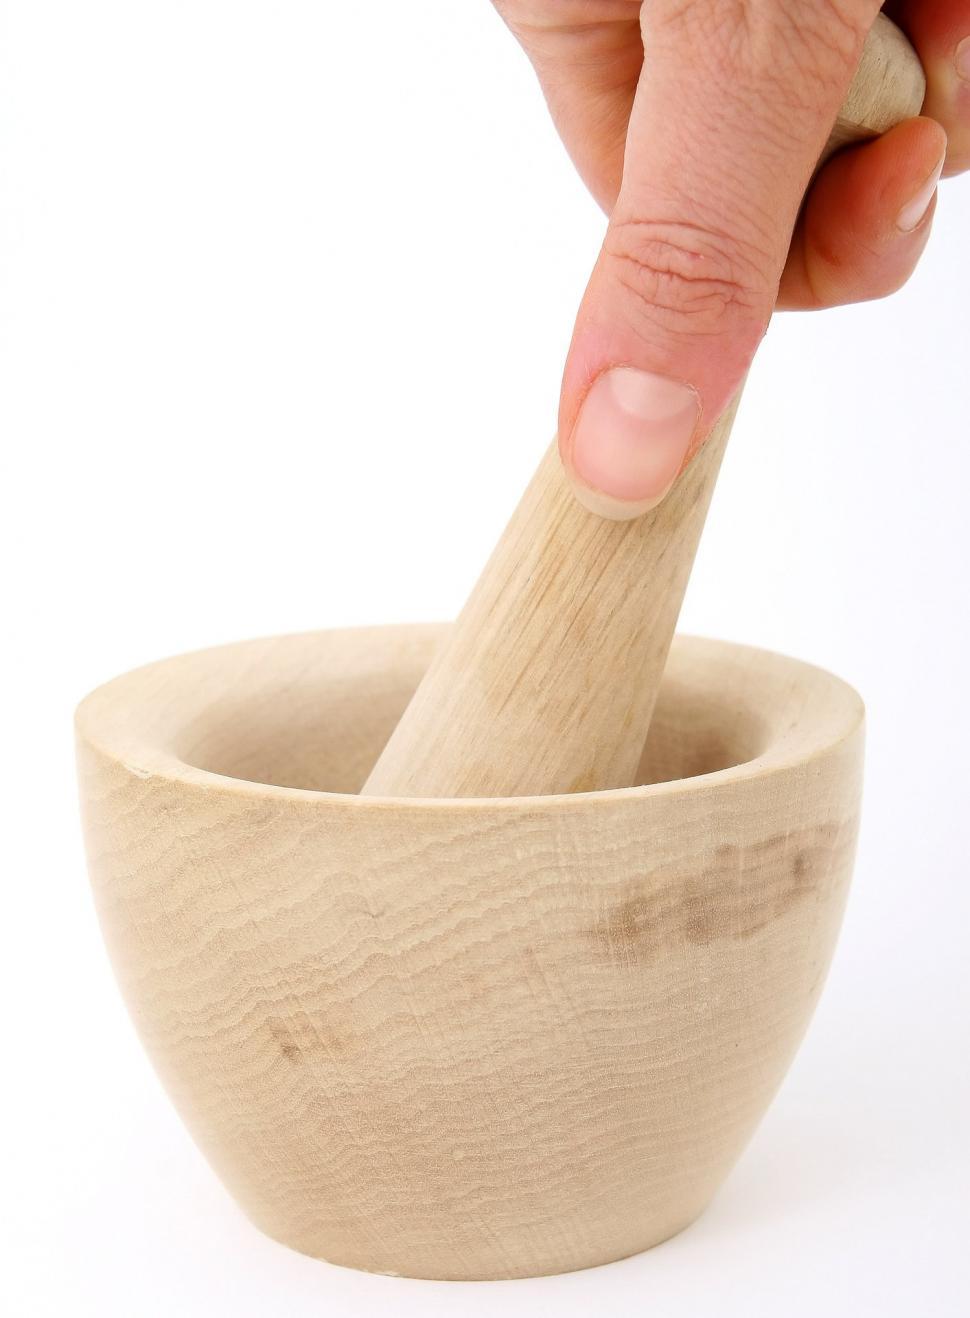 Free Image of mortar pestle mortar and pestle grind spice tools cooking utensil kitchen grinding 